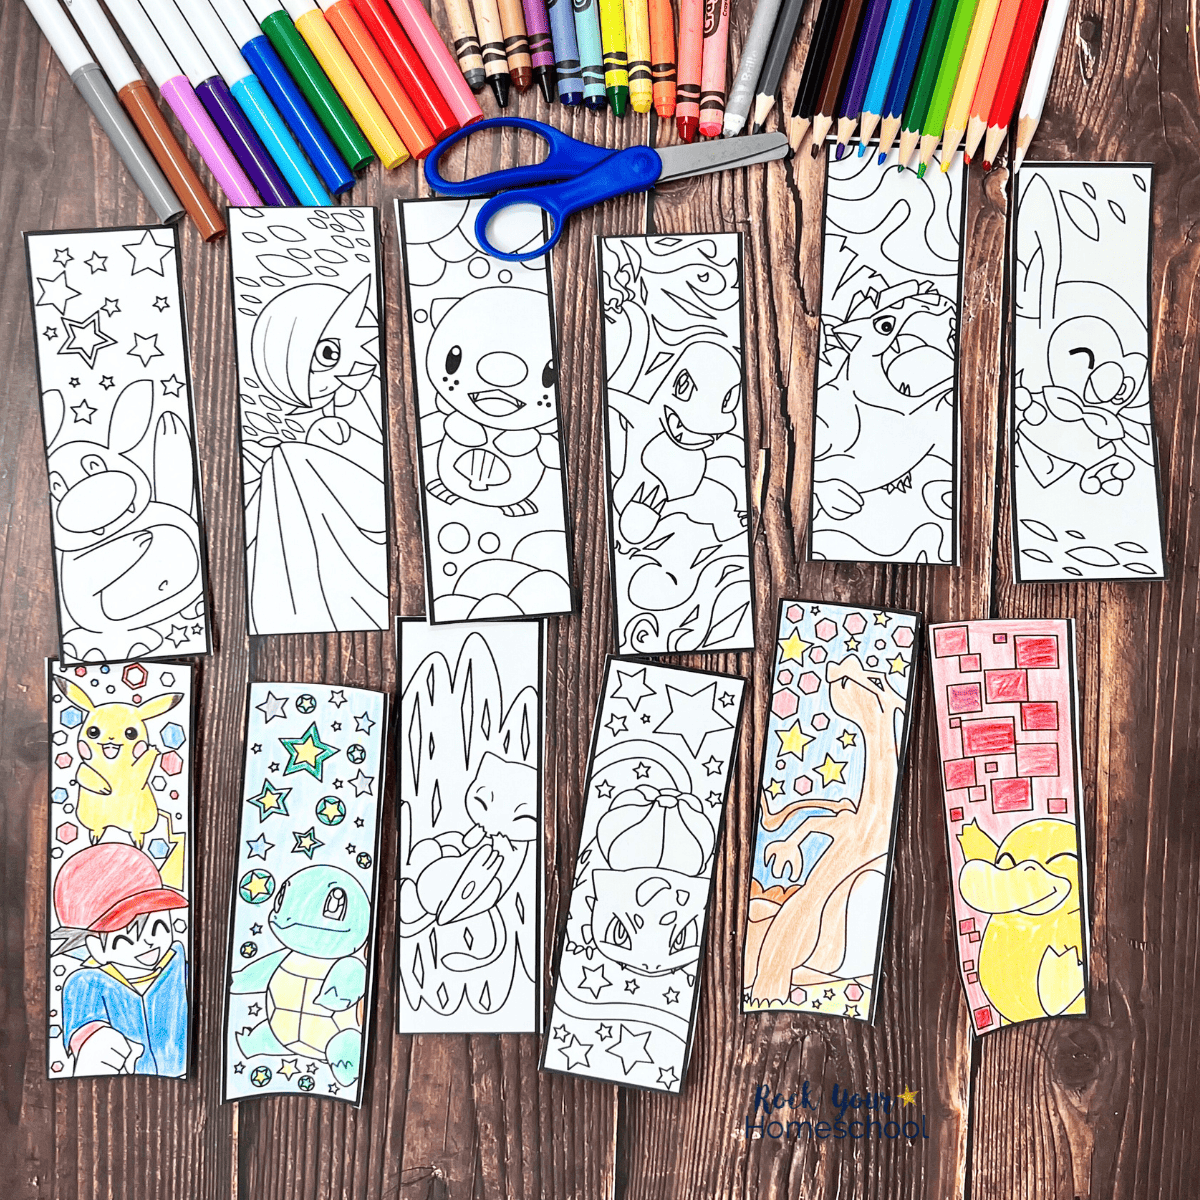 Pokemon Bookmarks to Color for Easy Fun with Kids (Free)